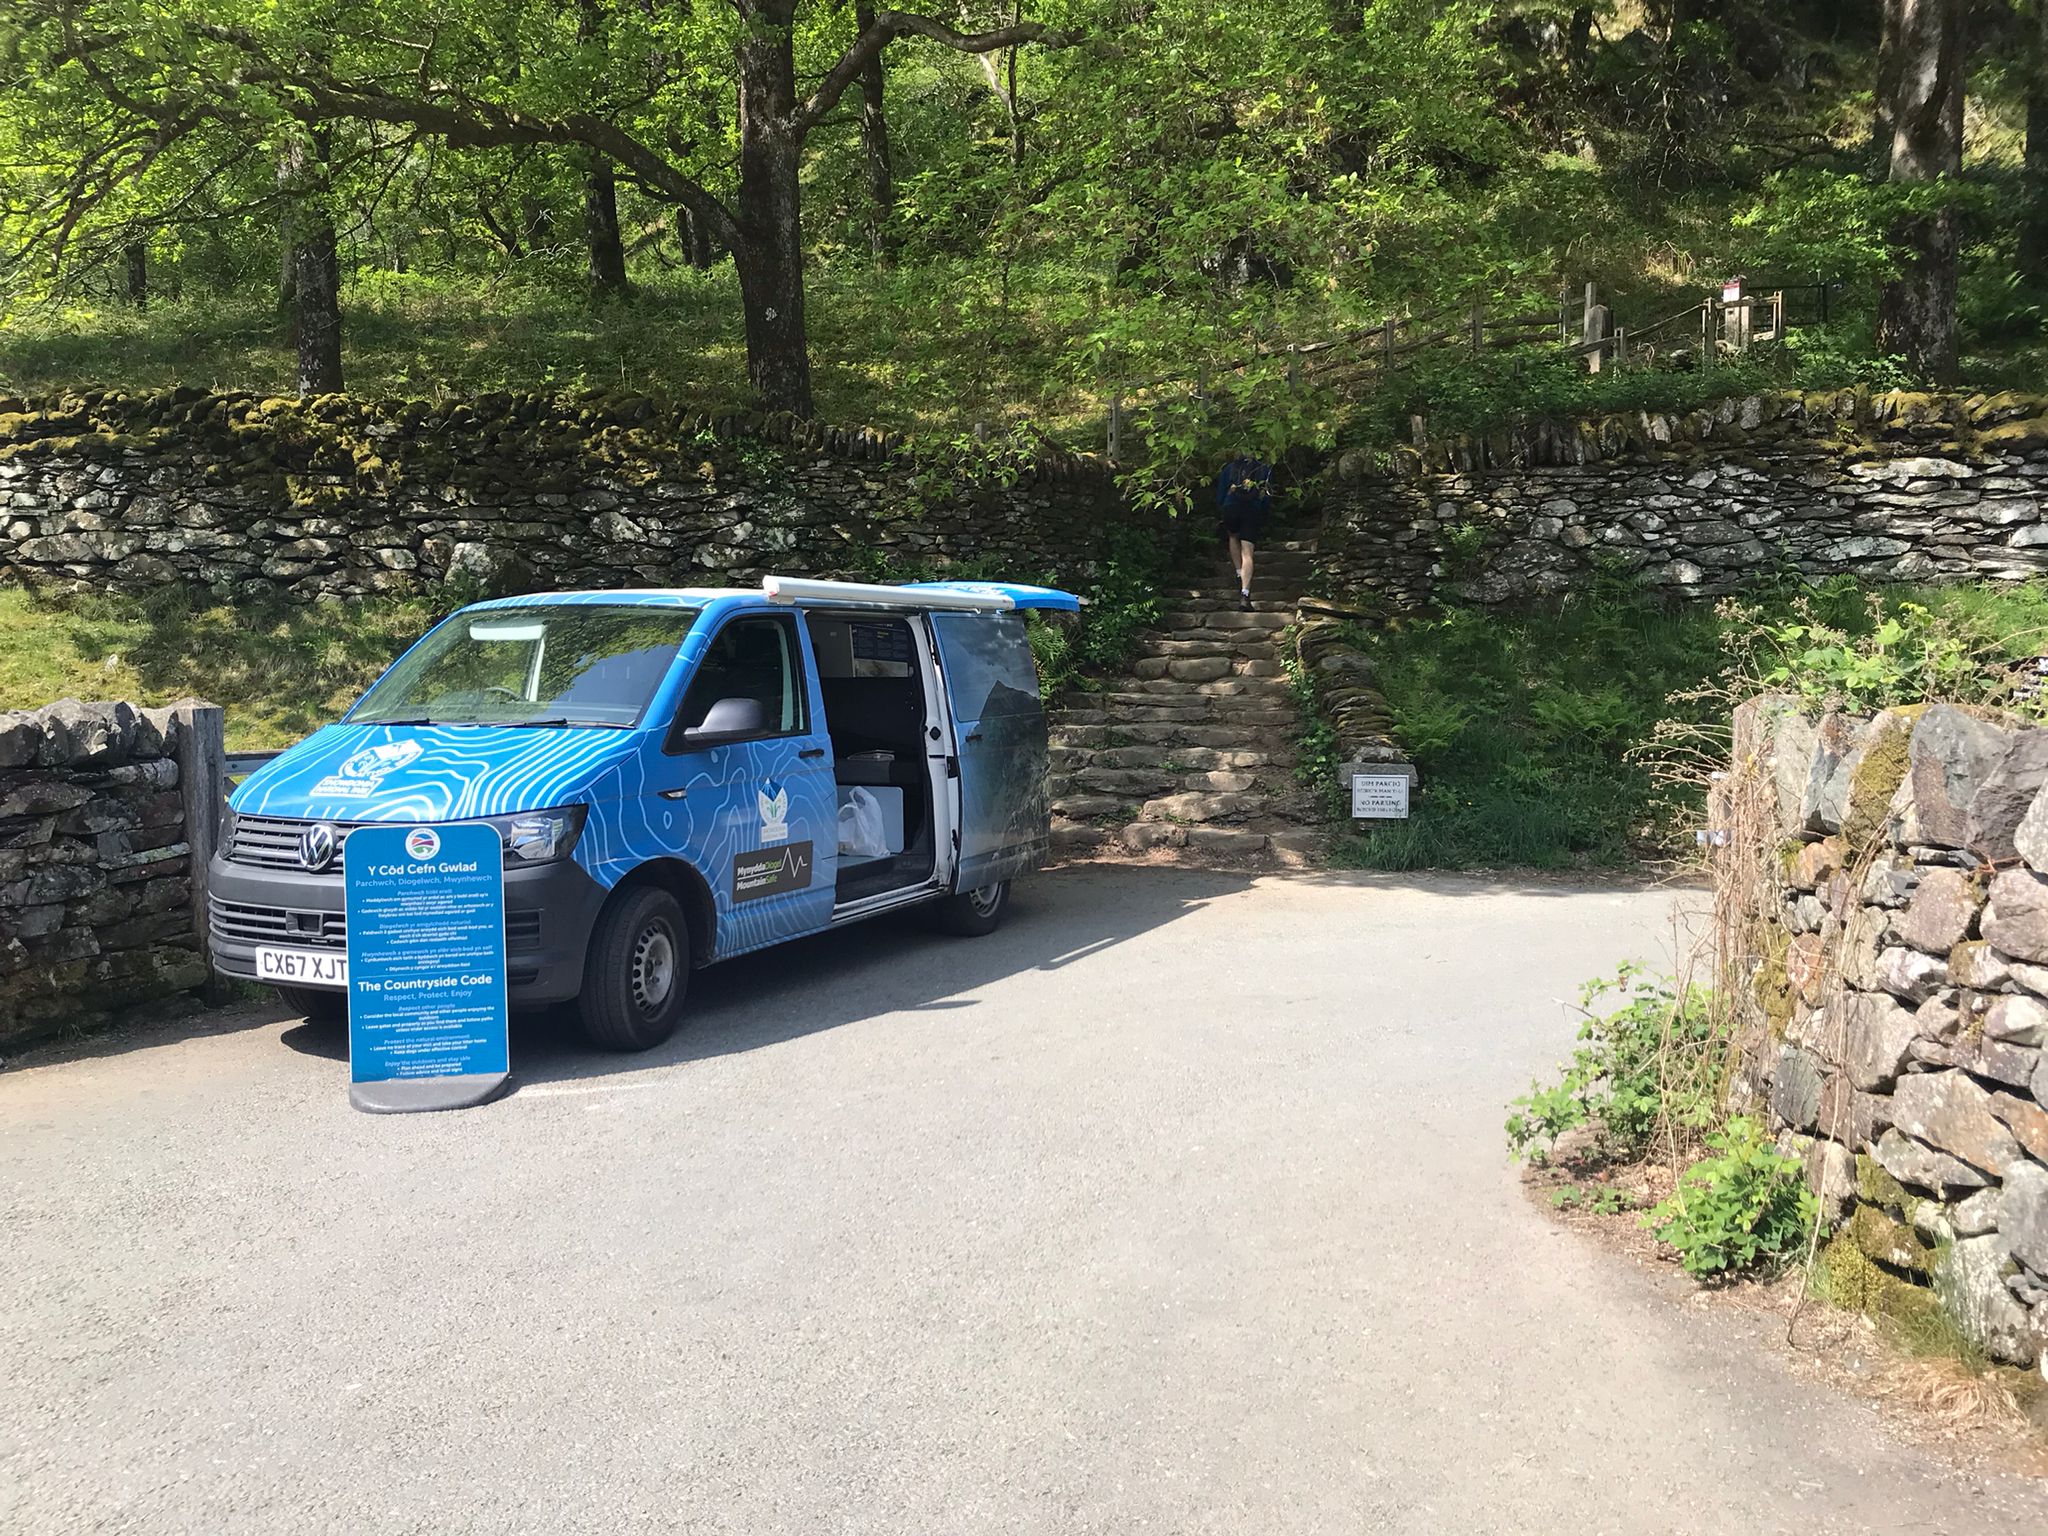 Multi-Agency Collaboration to Promote Responsible Tourism at Nant Gwynant &#038; the Watkin Path